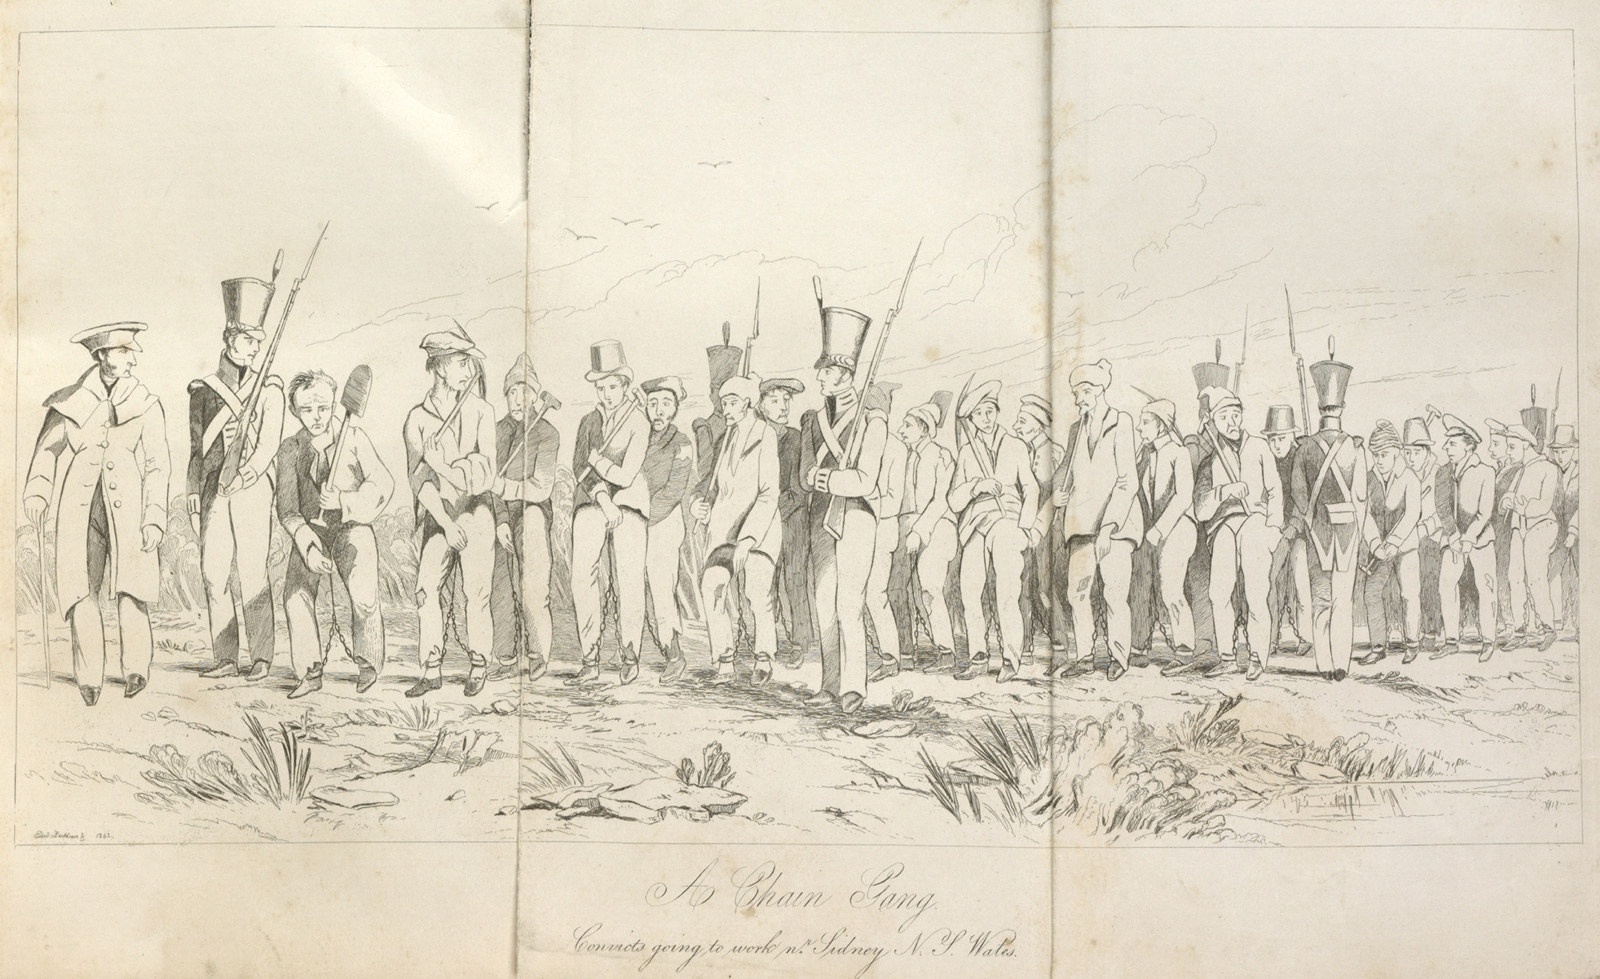 A chain gang, convicts going to work near Sidney [i.e. Sydney], New South Wales 